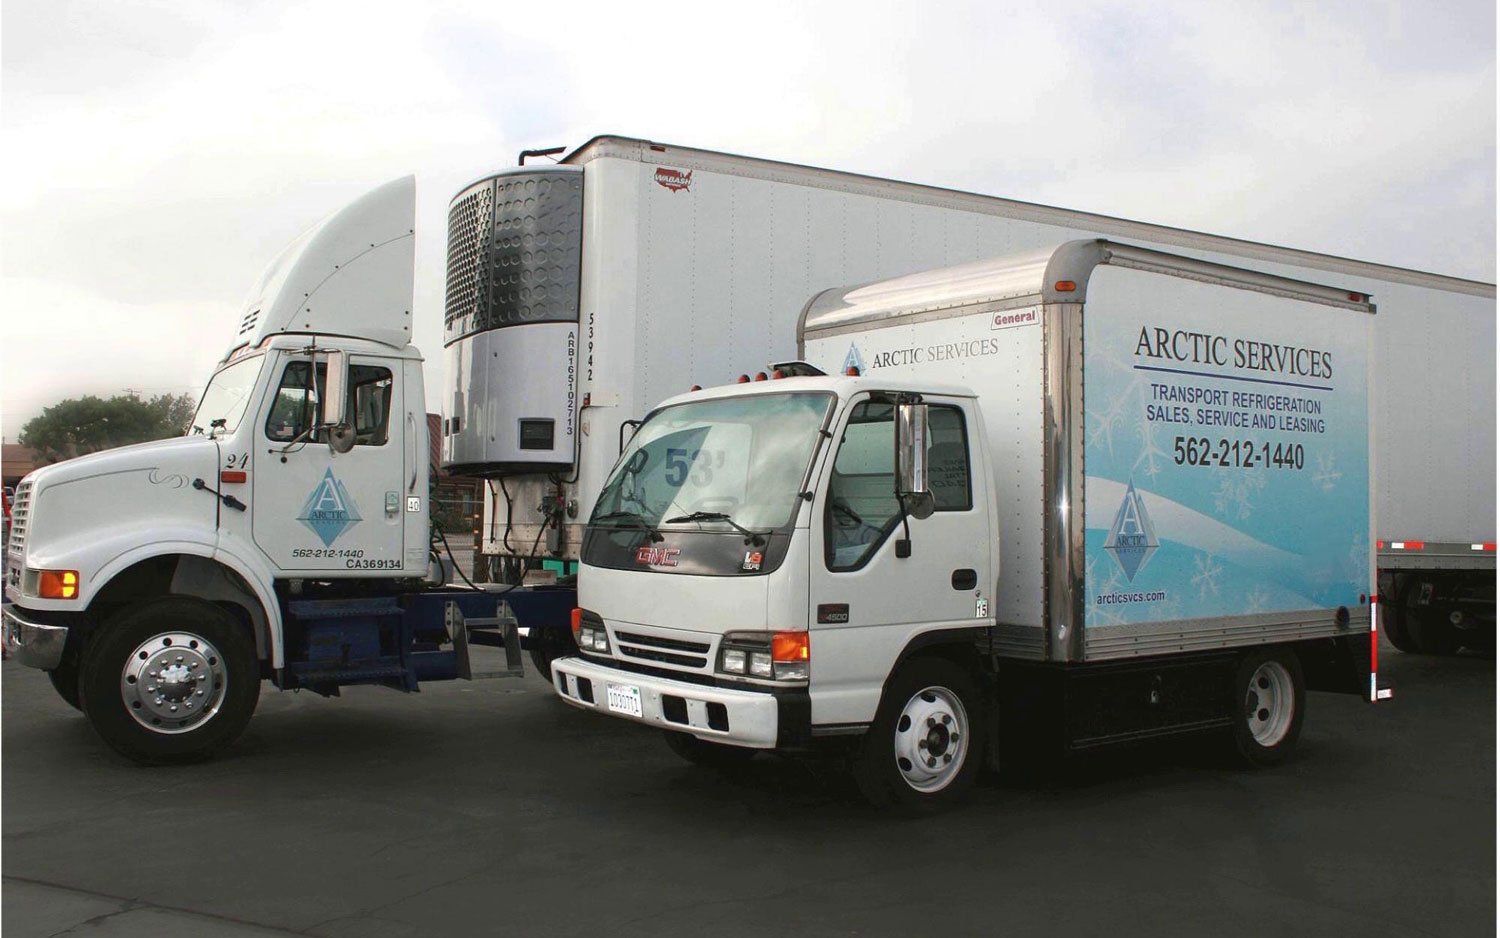 Refrigeration Unit And Delivery Van — Mobile Refrigerated Trailer Repairs — Arctic Services 562-212-1440